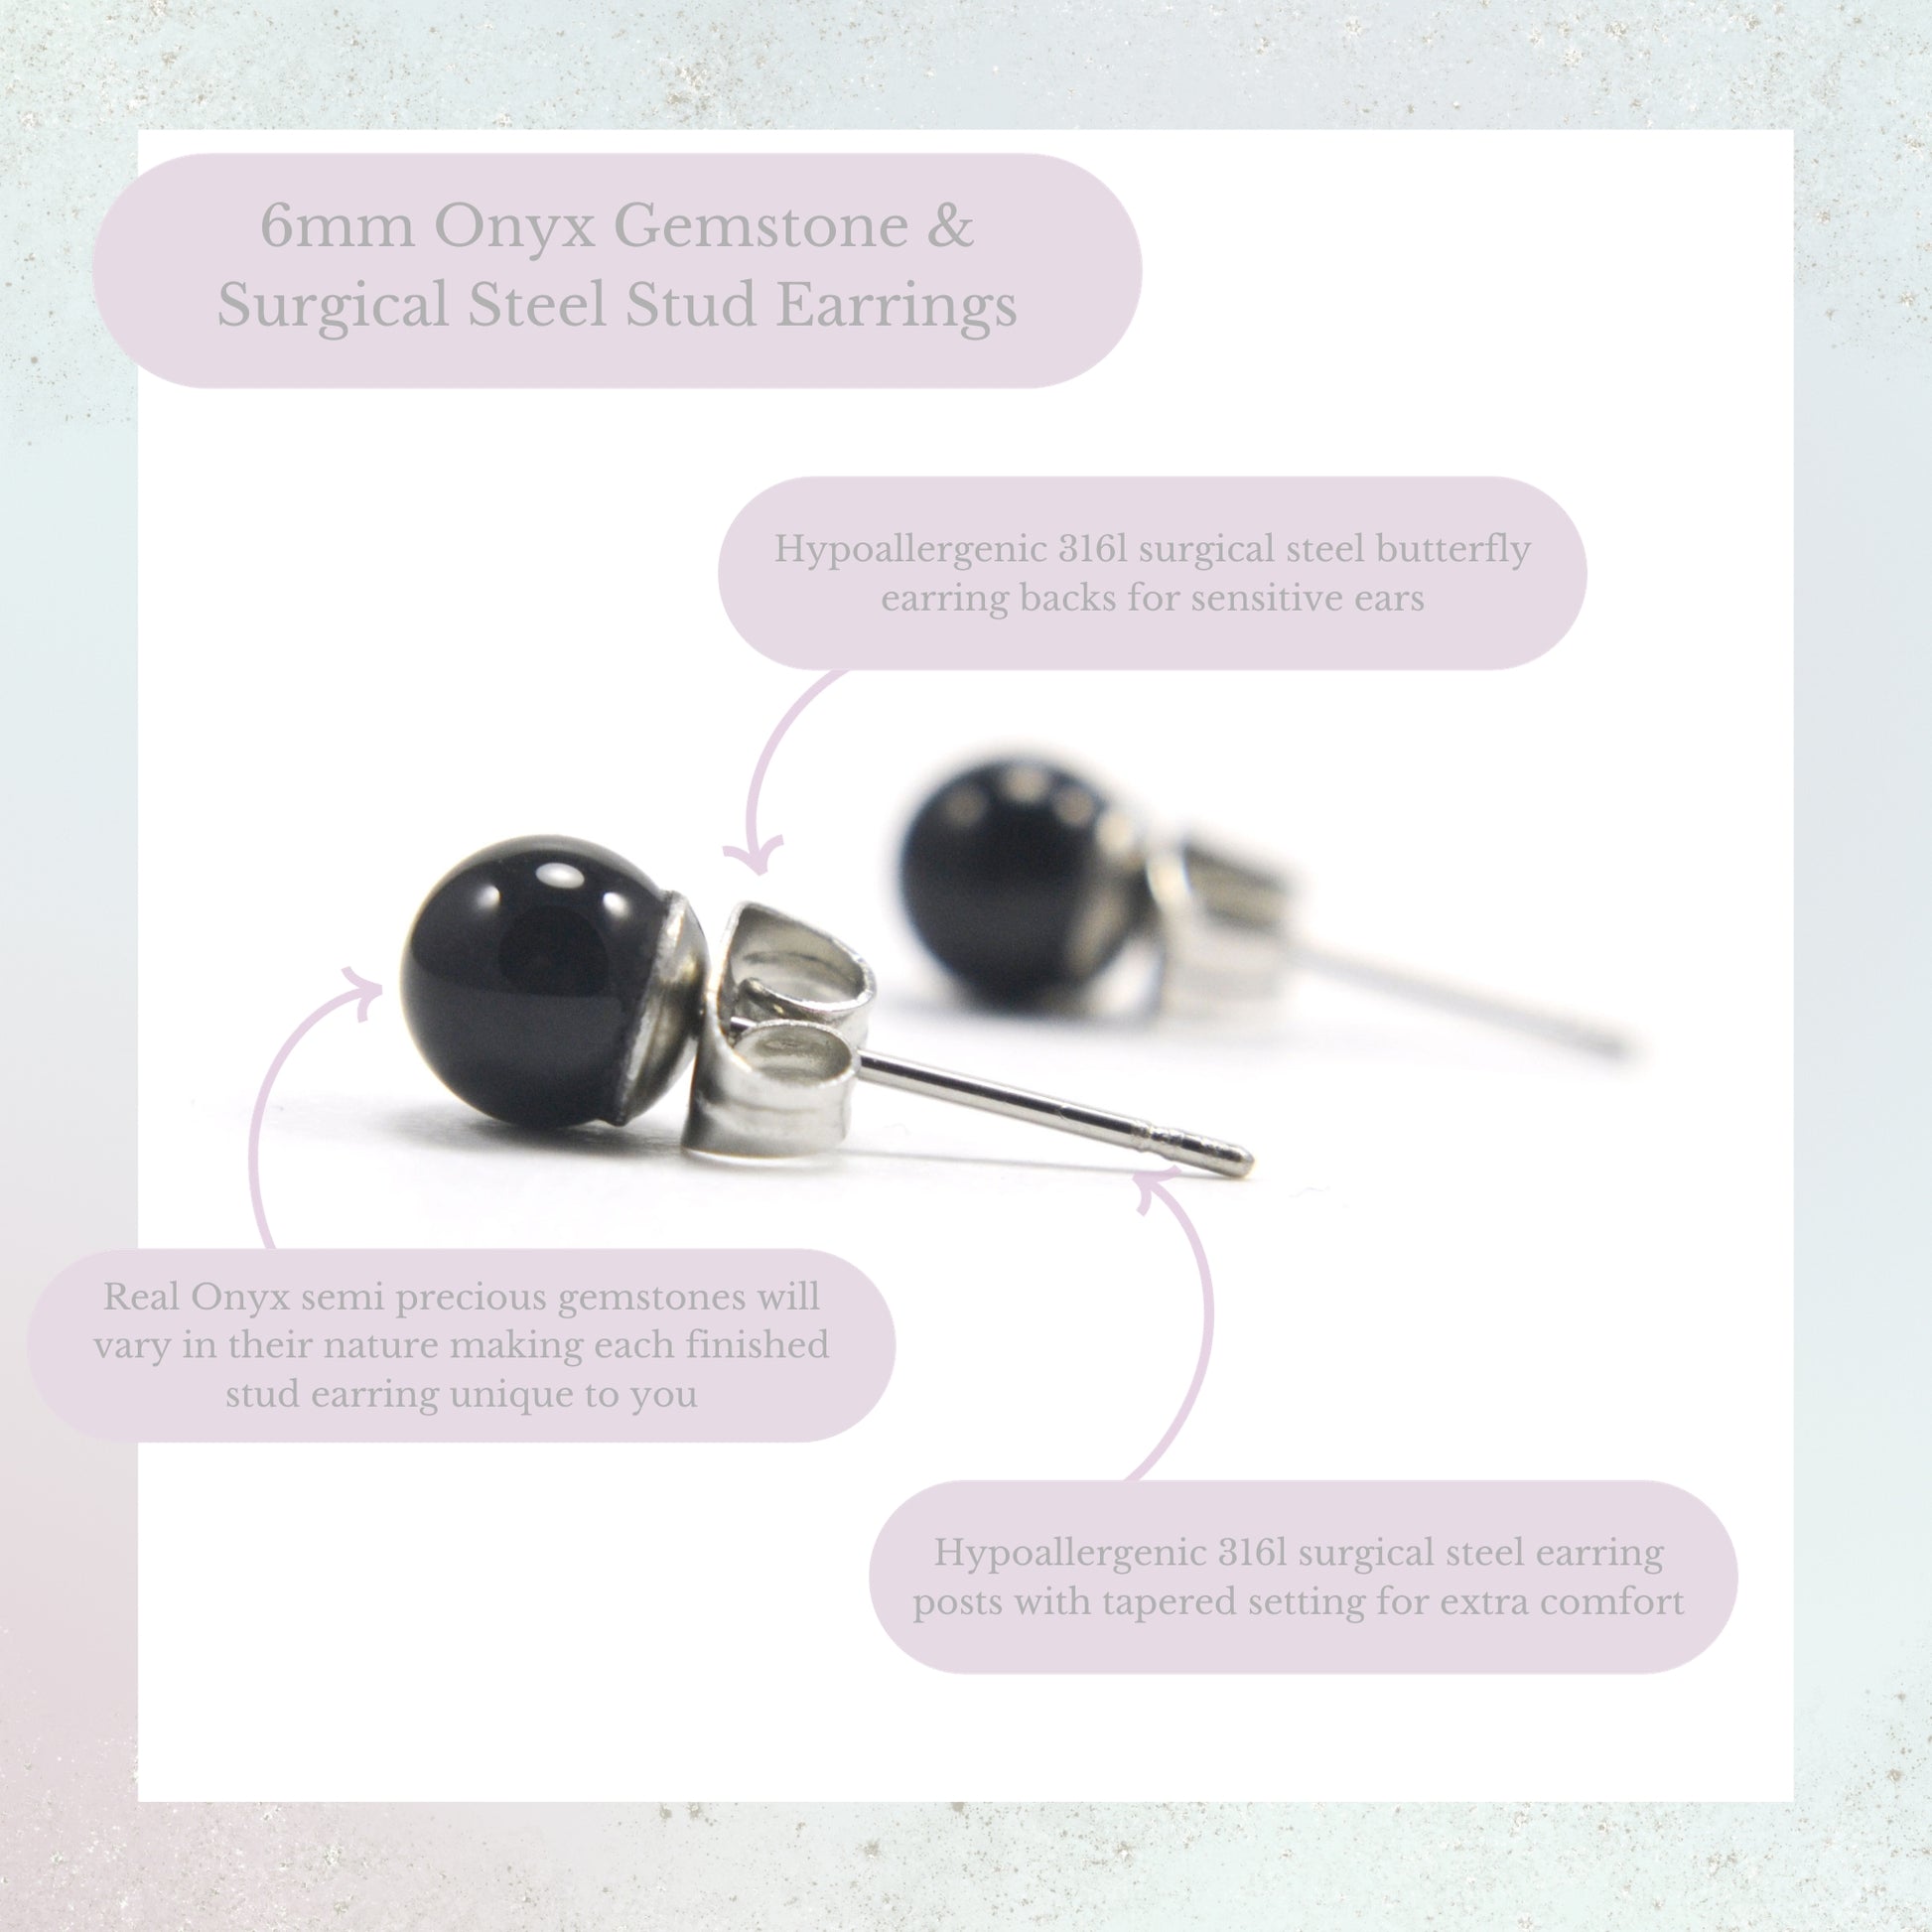 6mm Onyx Gemstone & Surgical Steel Stud Earrings Product Information Graphic